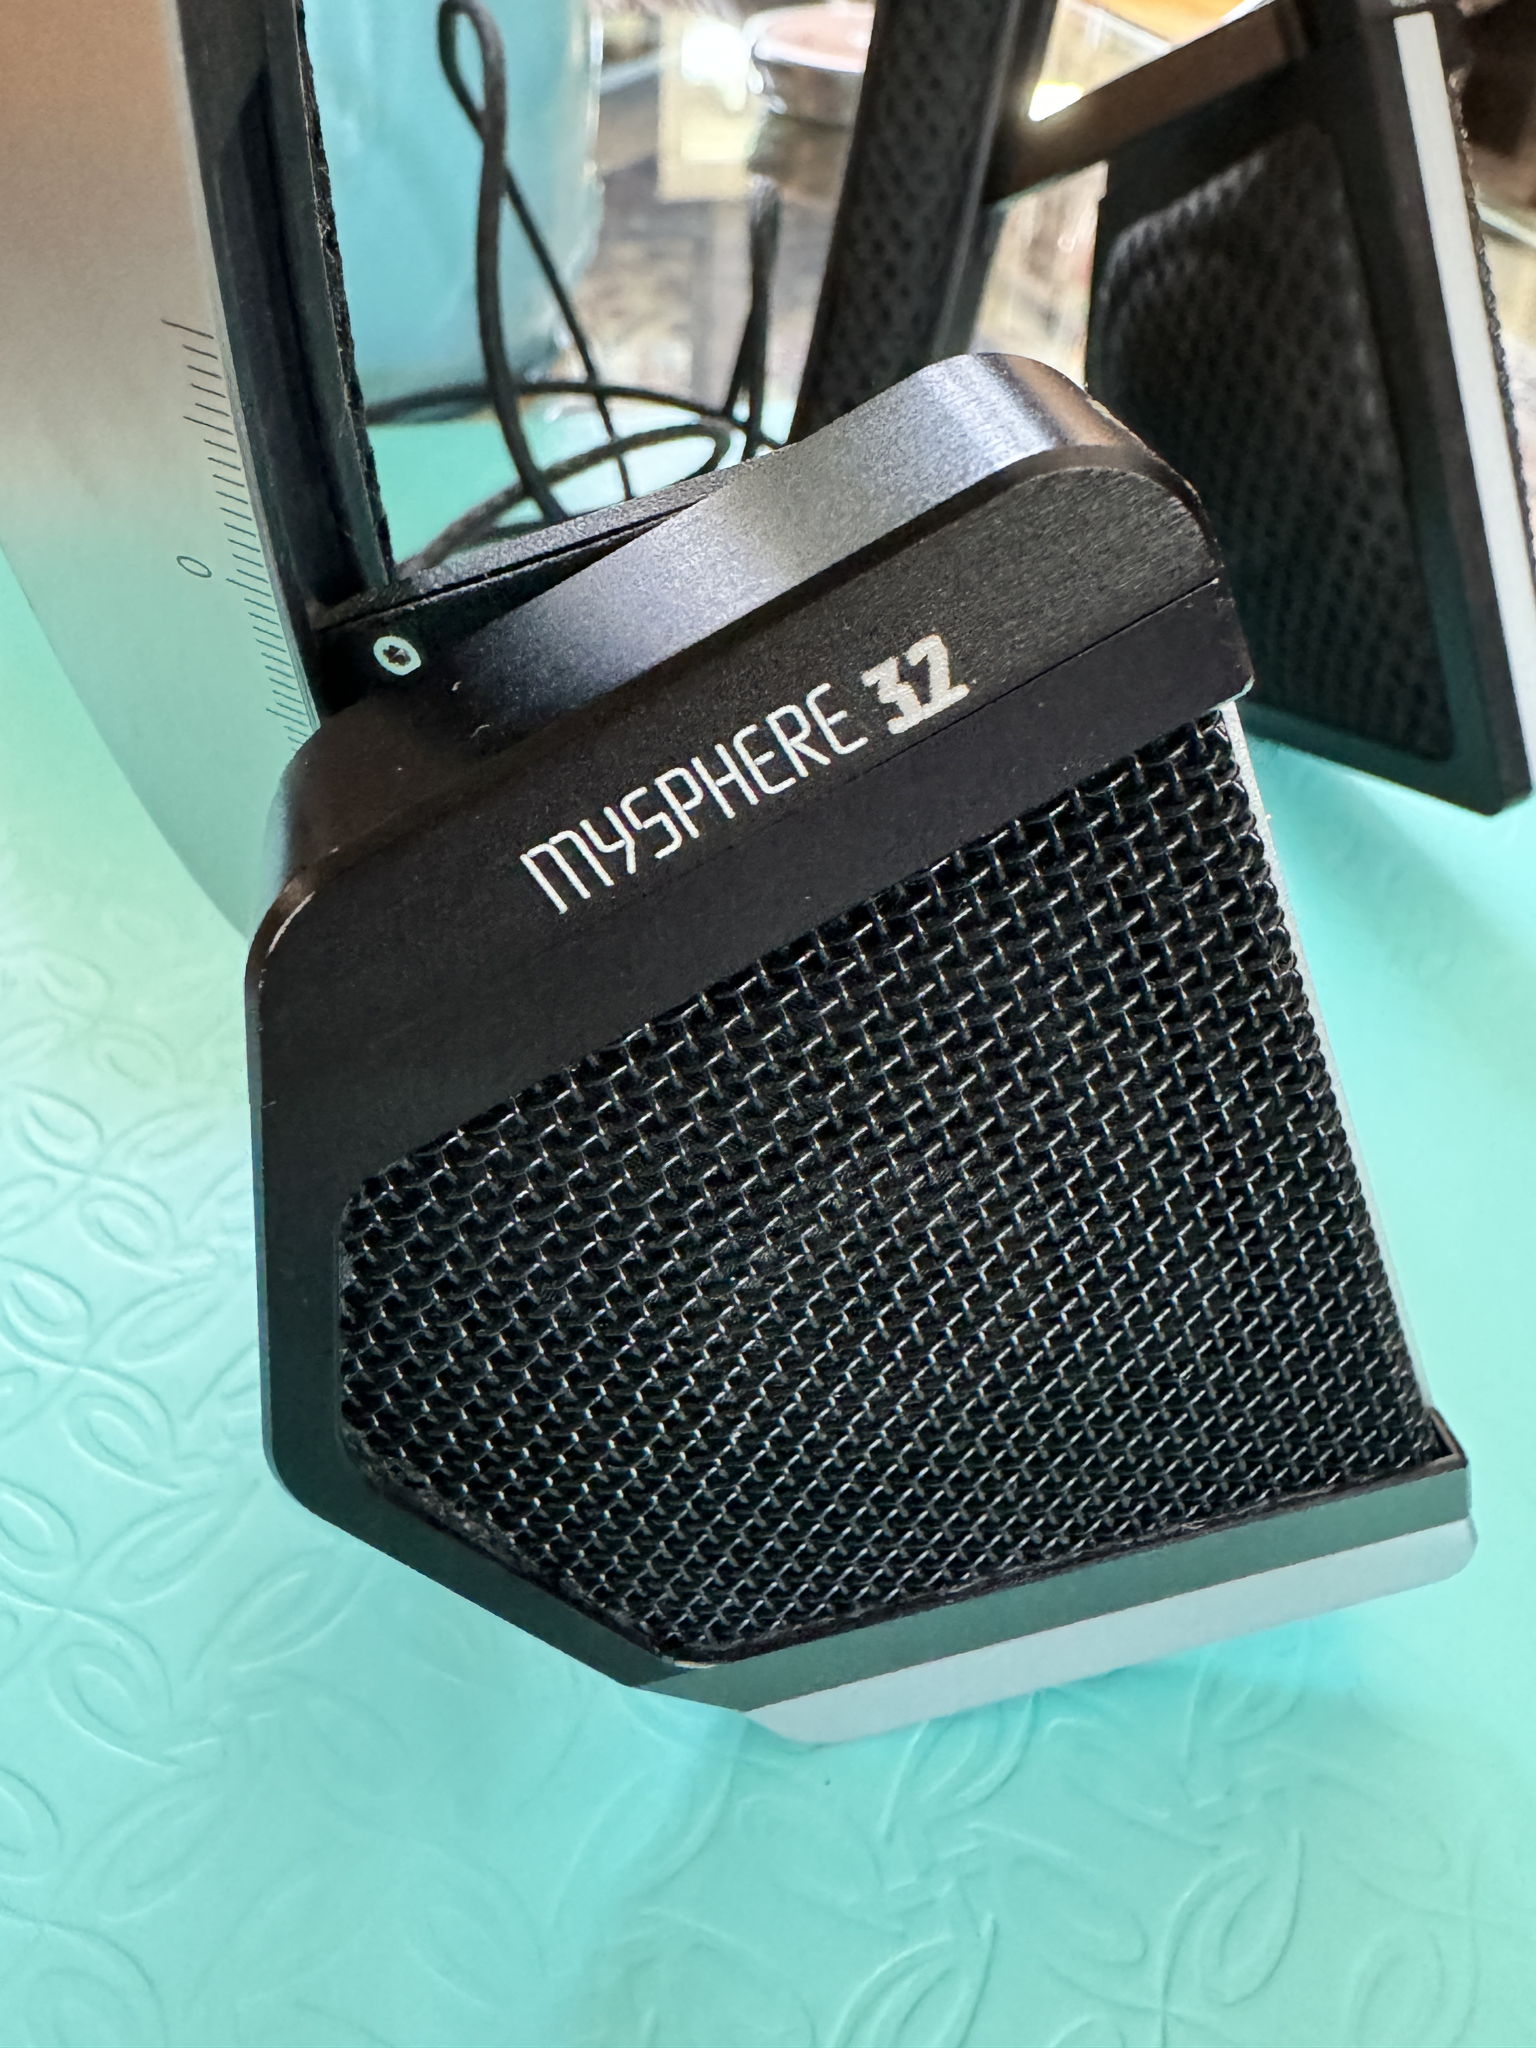 MySphere 3.2 headphones - a minty steal at $1900! 5